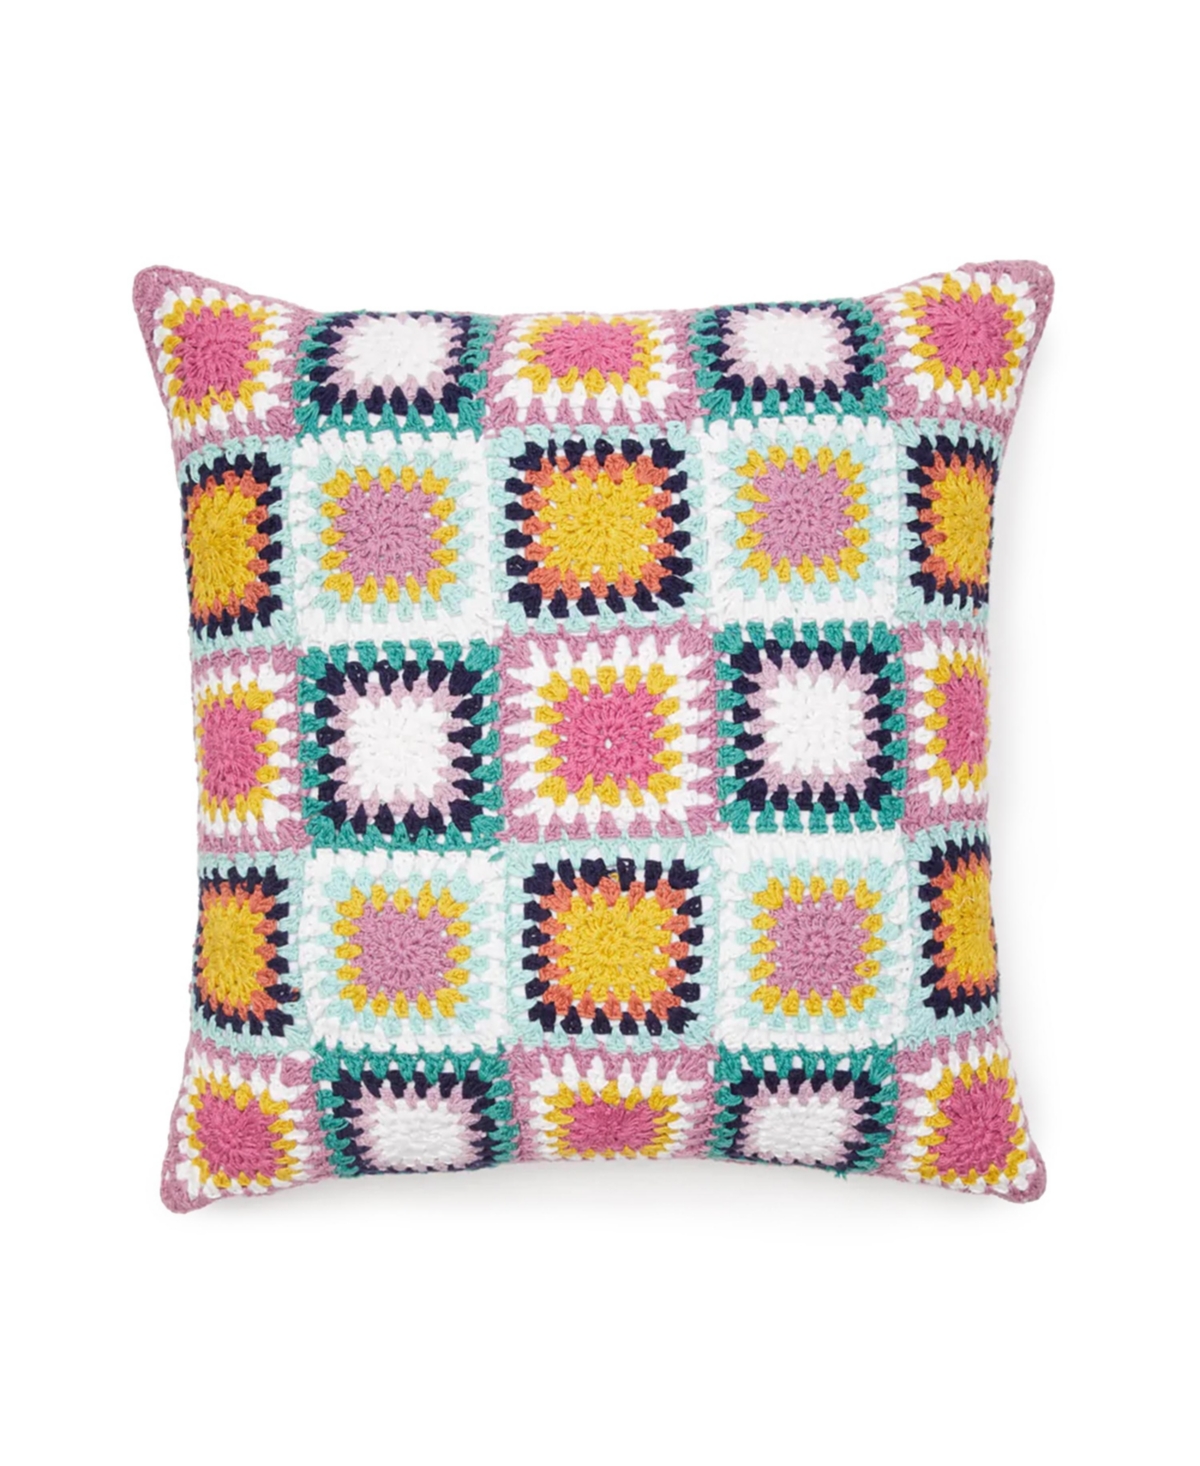 Dormify June Crochet Square Pillow, 20" X 20", Ultra-cute Styles To Personalize Your Room In June Turquoise